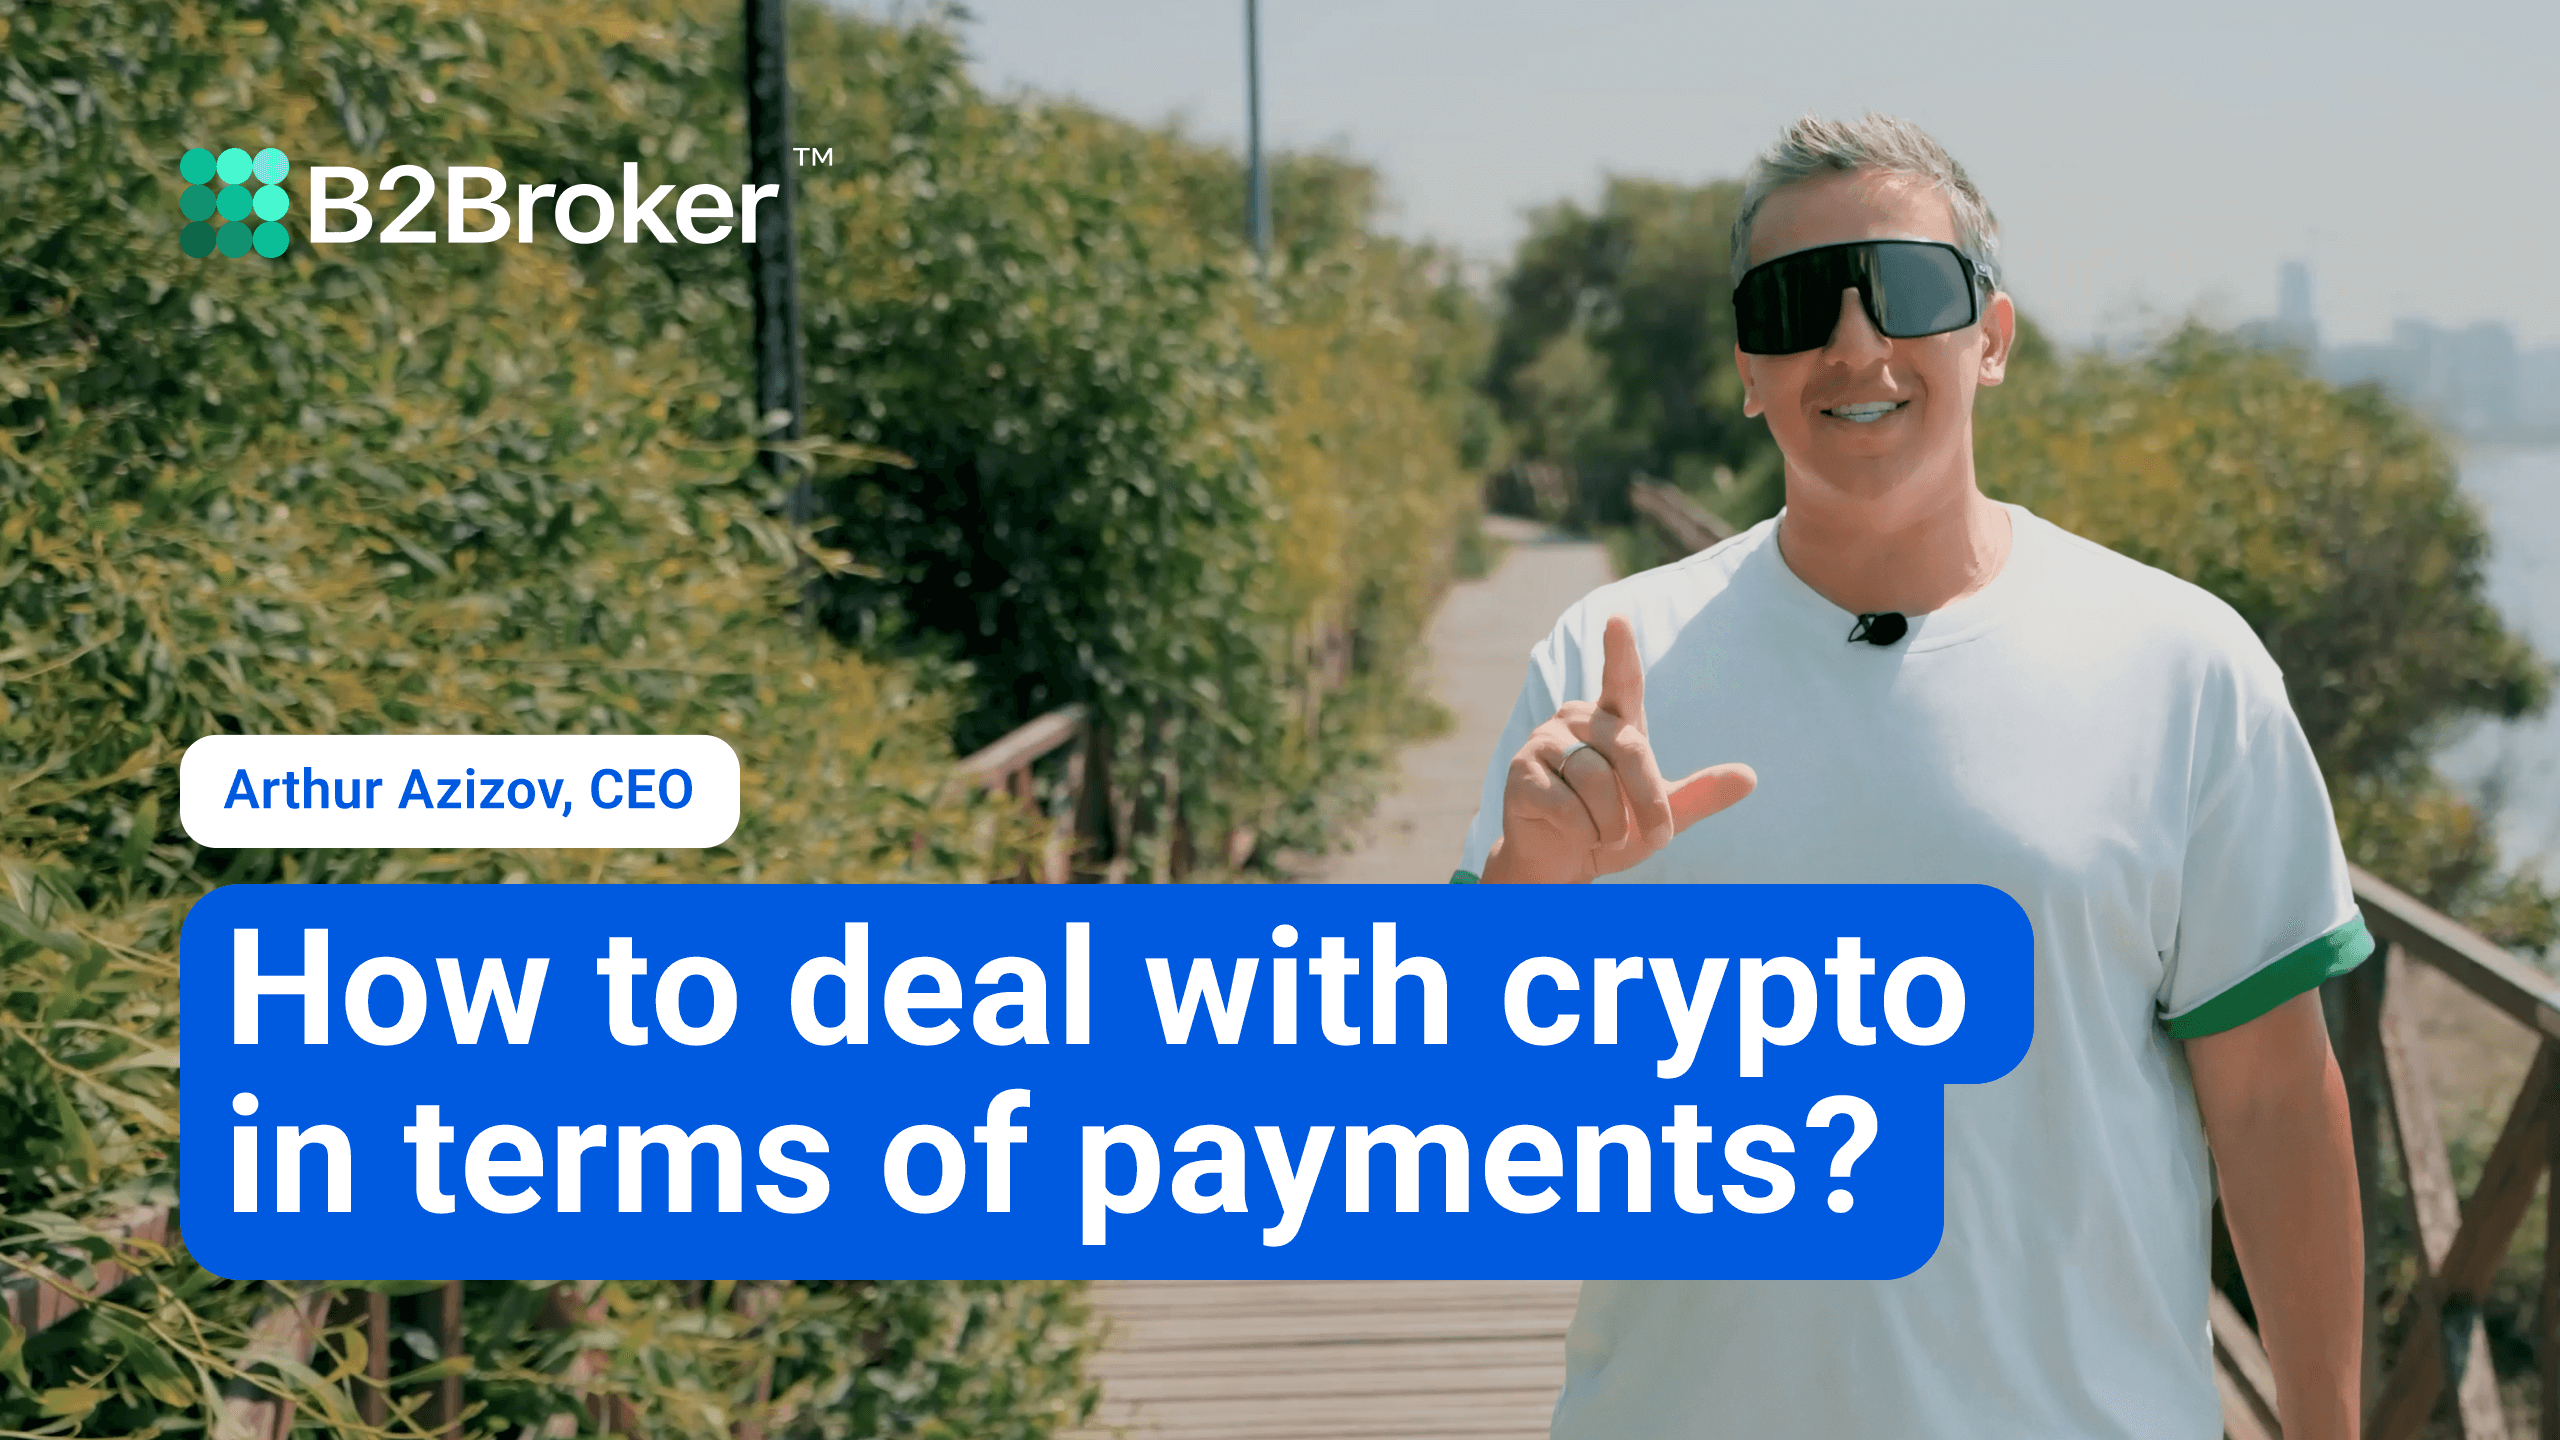 B2Broker Q&A | Cryptocurrency Payments for Brokers